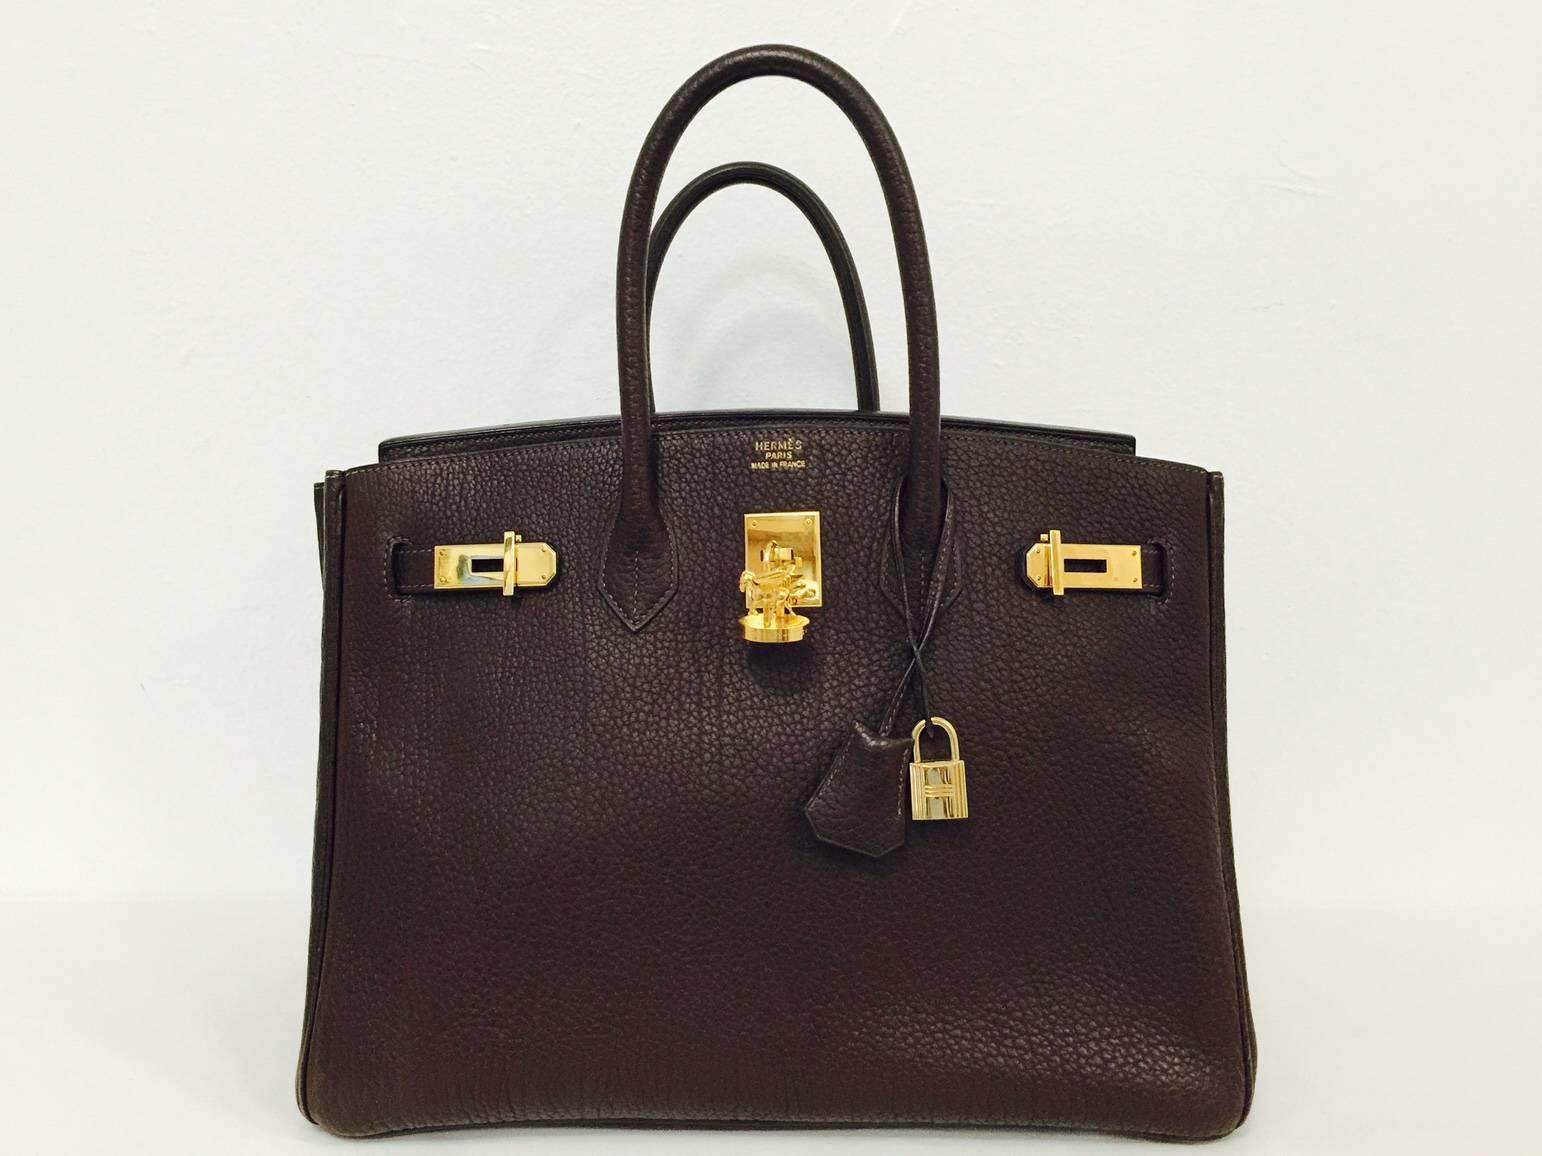 Brown Fjord Leather Birkin Bag 35 GHW  is in unbelievable condition....It is indeed a case study in craftsmanship!  Stamped X in a circle, this bag was made in 2000.  Features include the intricate Birkin Croix clasp, lock and key security and